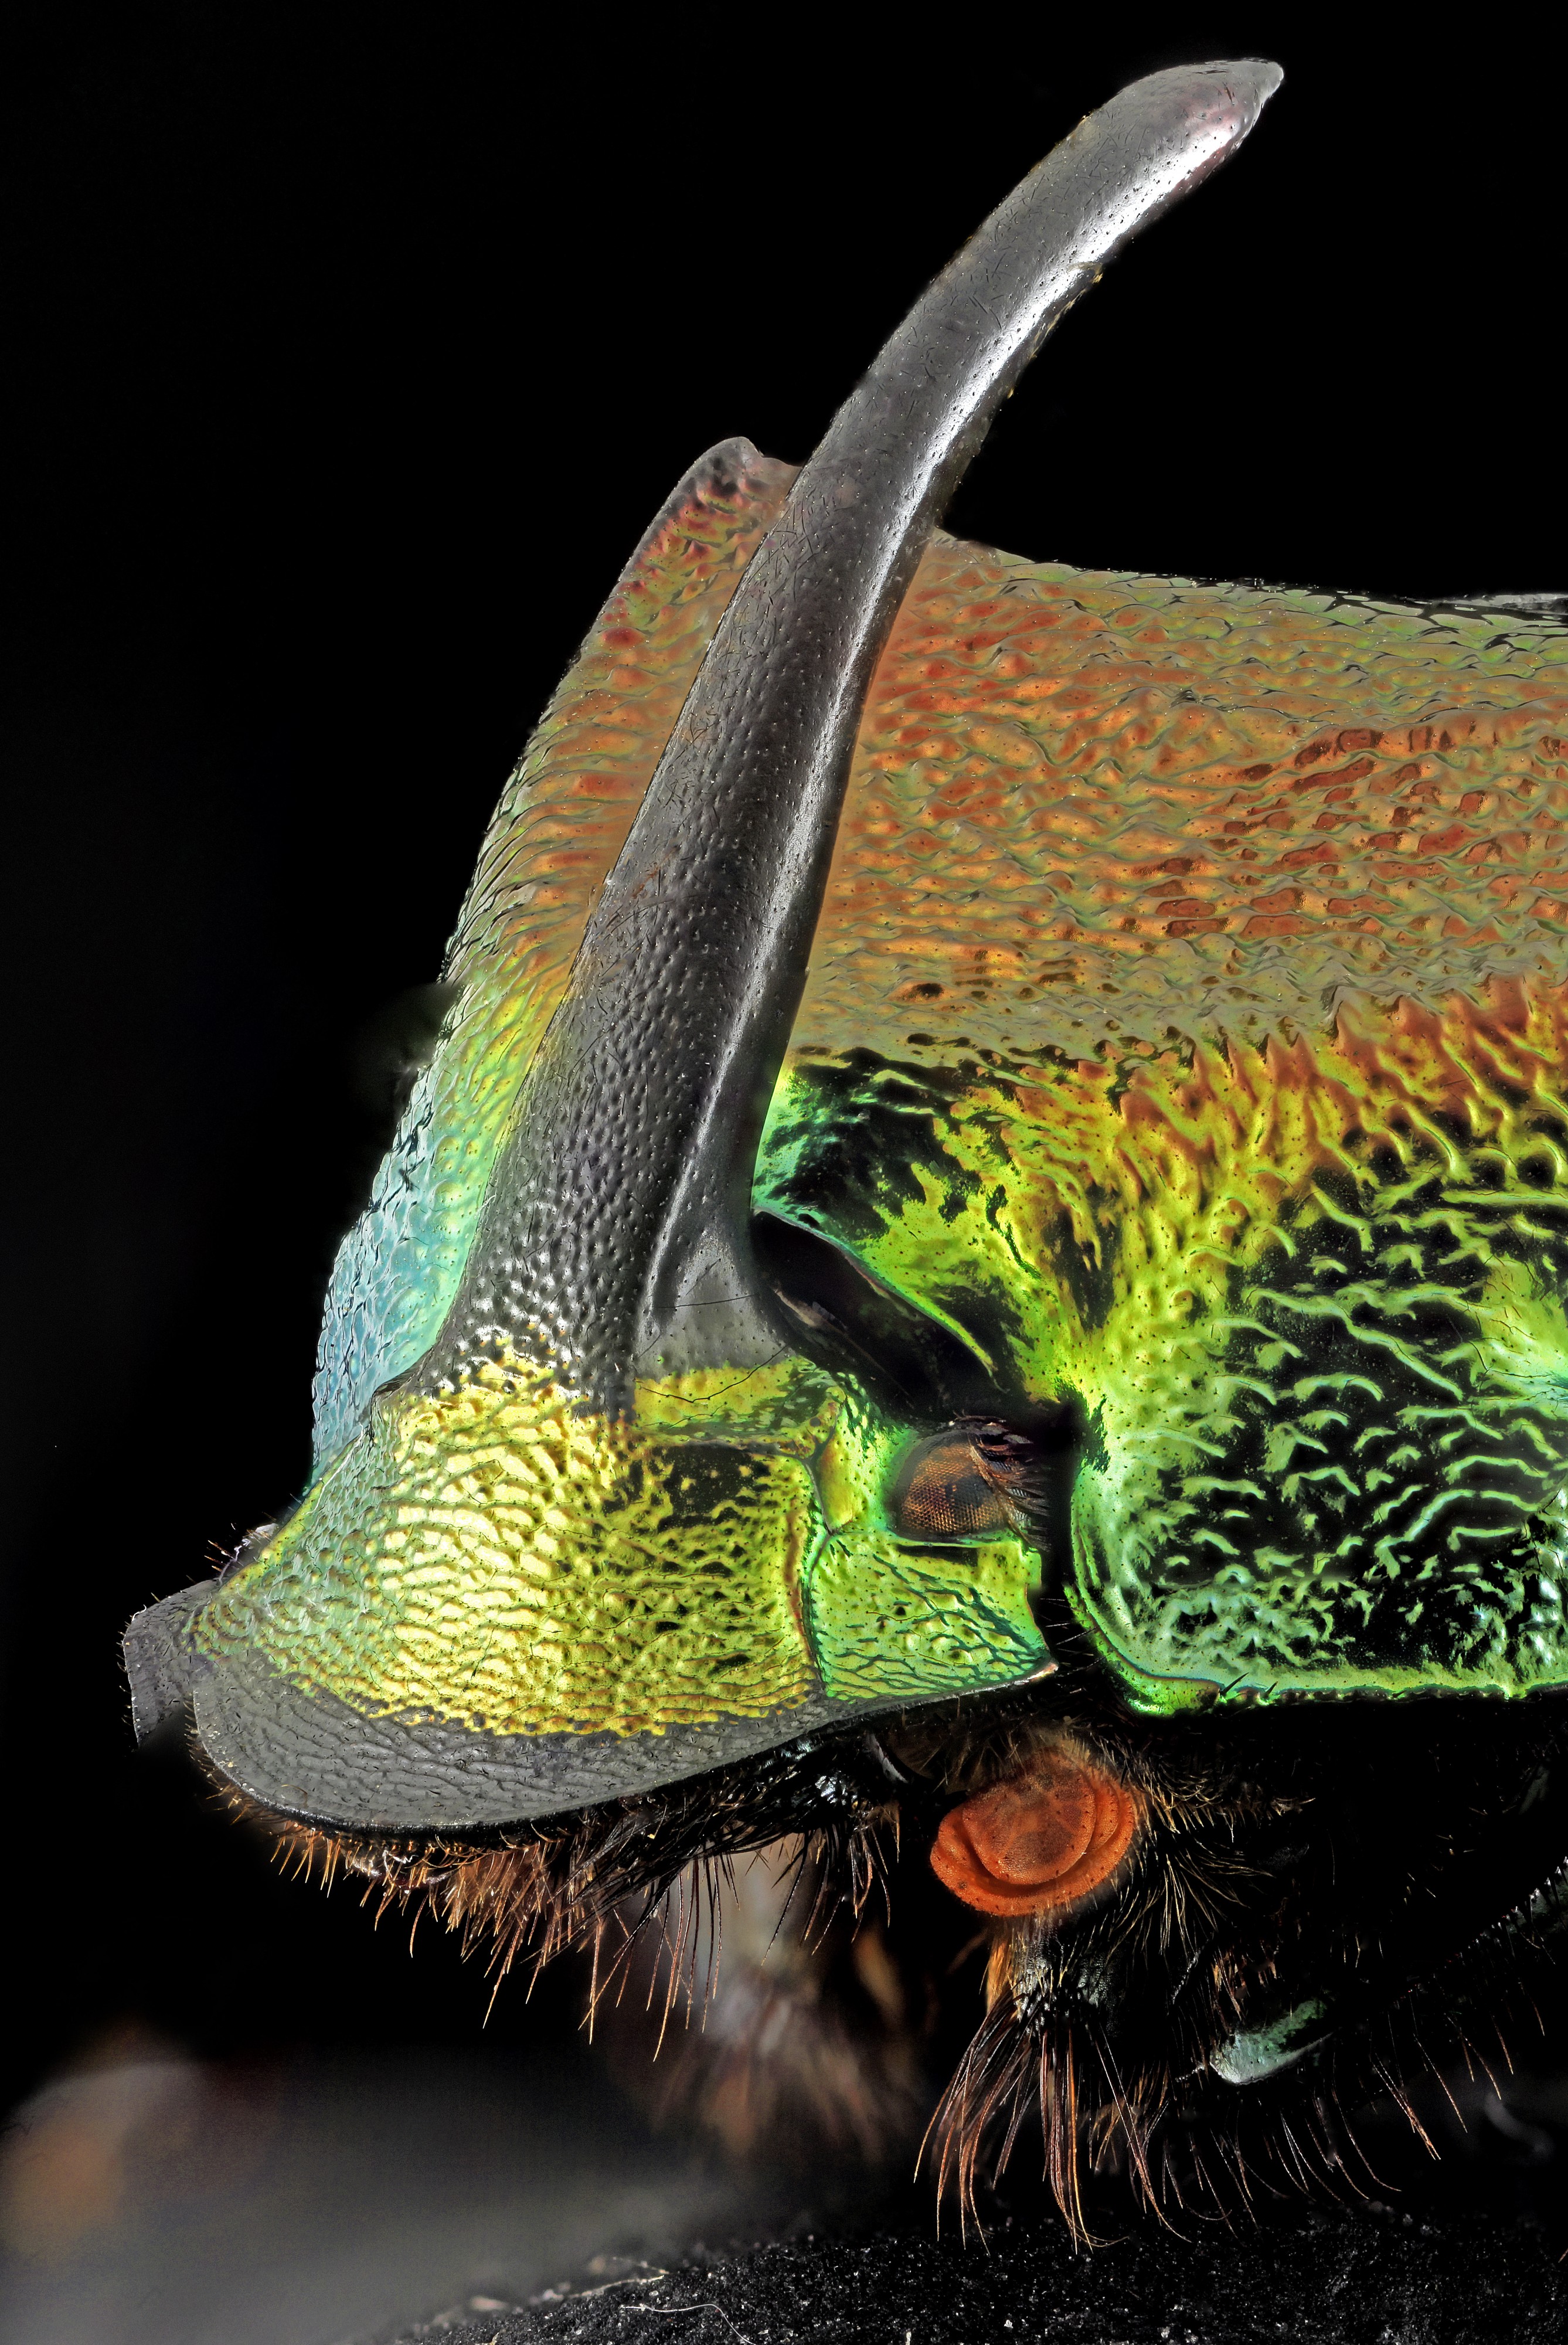 Rainbow Scarab, face1, silver spring, md 2013-12-31-14.48.26 ZS PMax Panorama2 (11678975526)